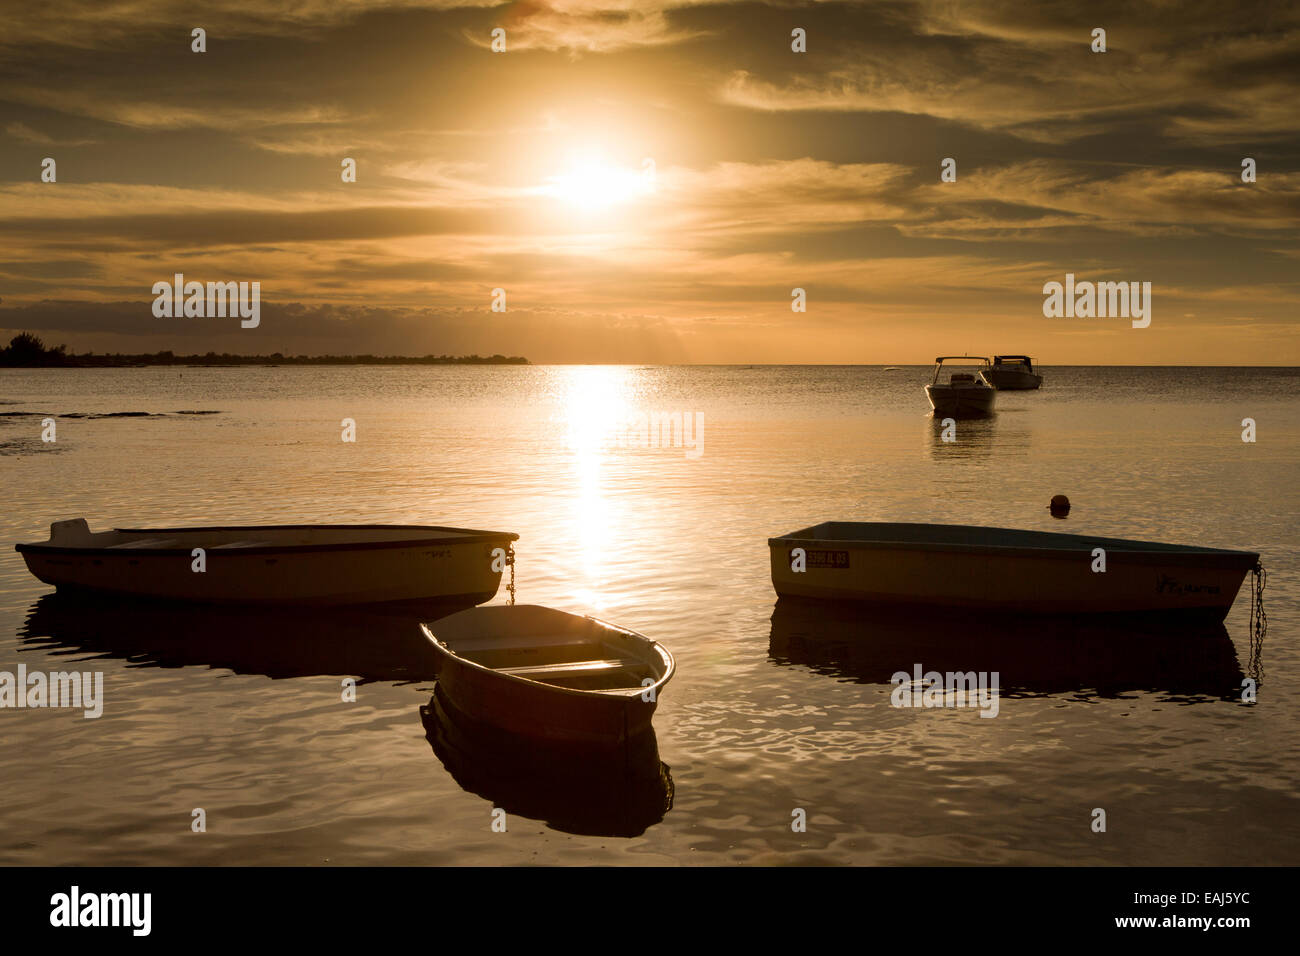 Mauritius, Pereybere, leisure boats lit by setting sun, on northern coast Stock Photo